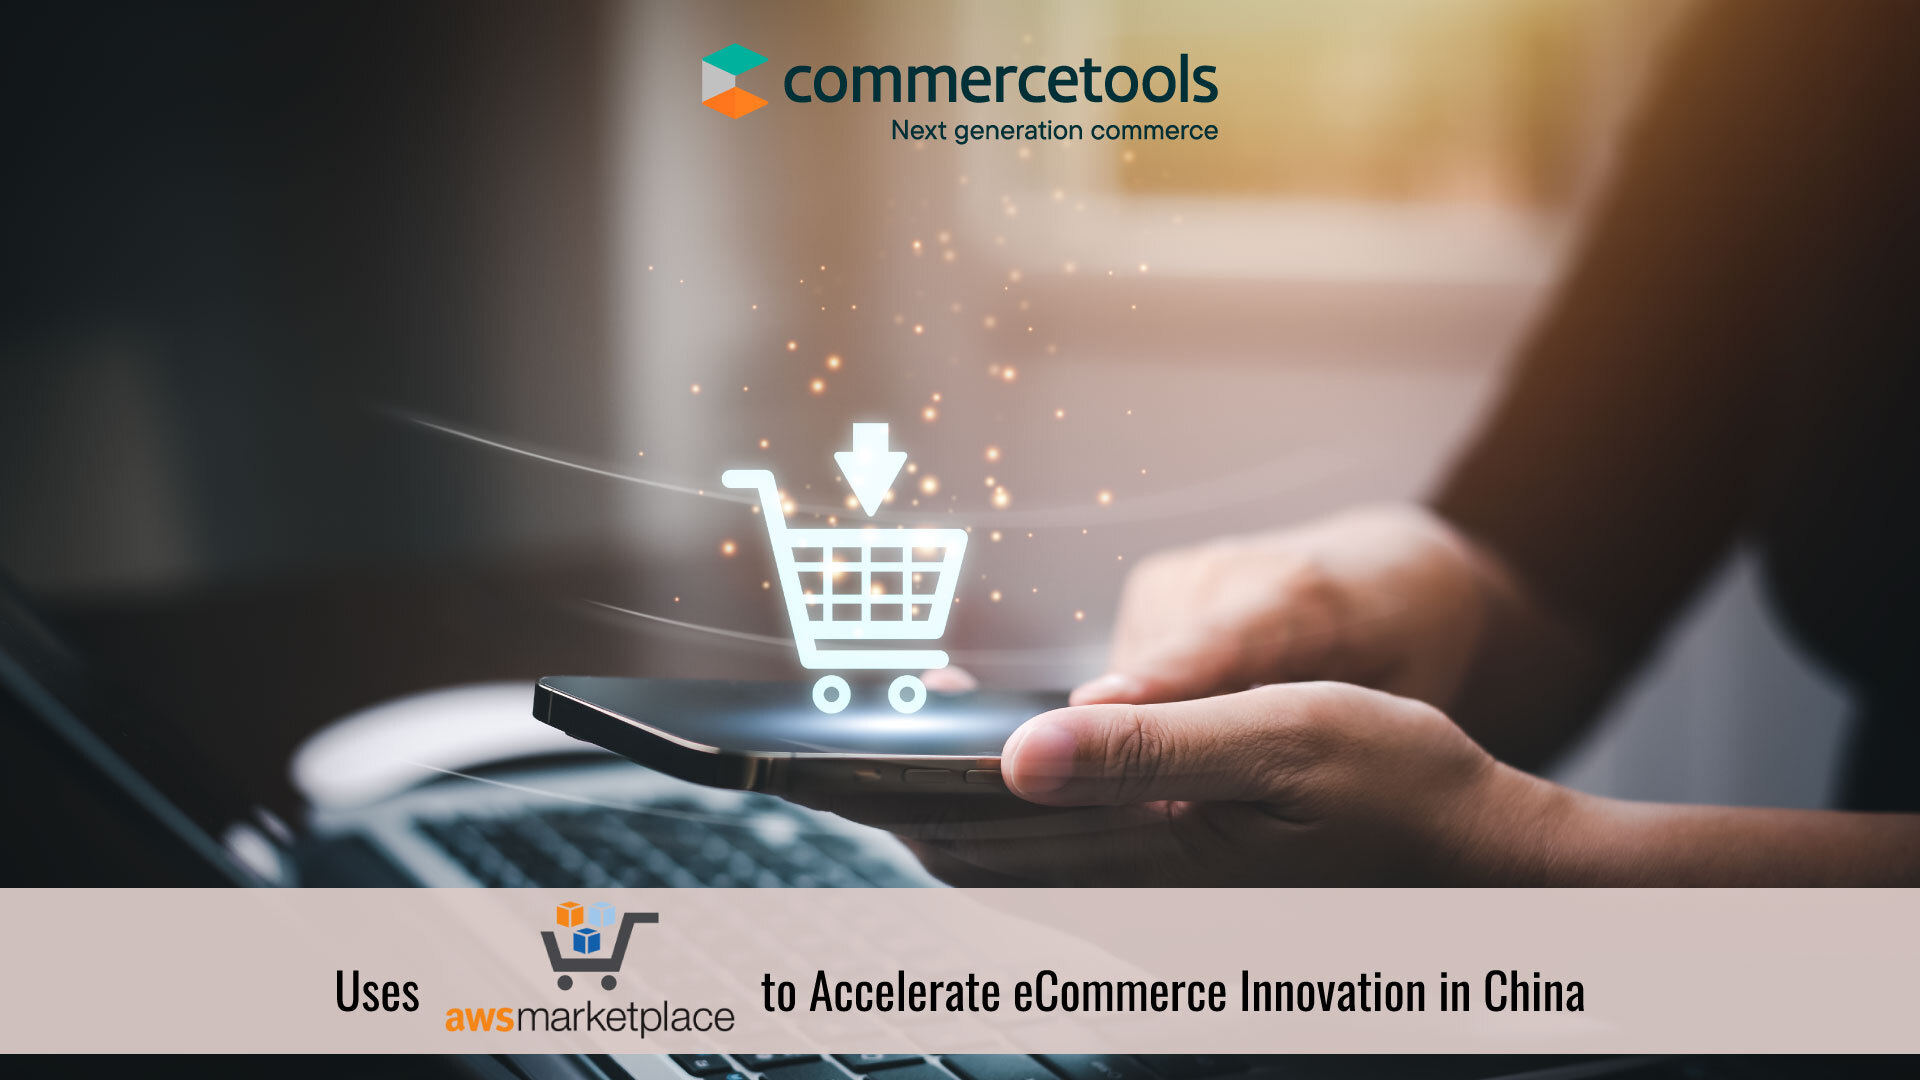 commercetools Uses AWS to Accelerate eCommerce Innovation in China